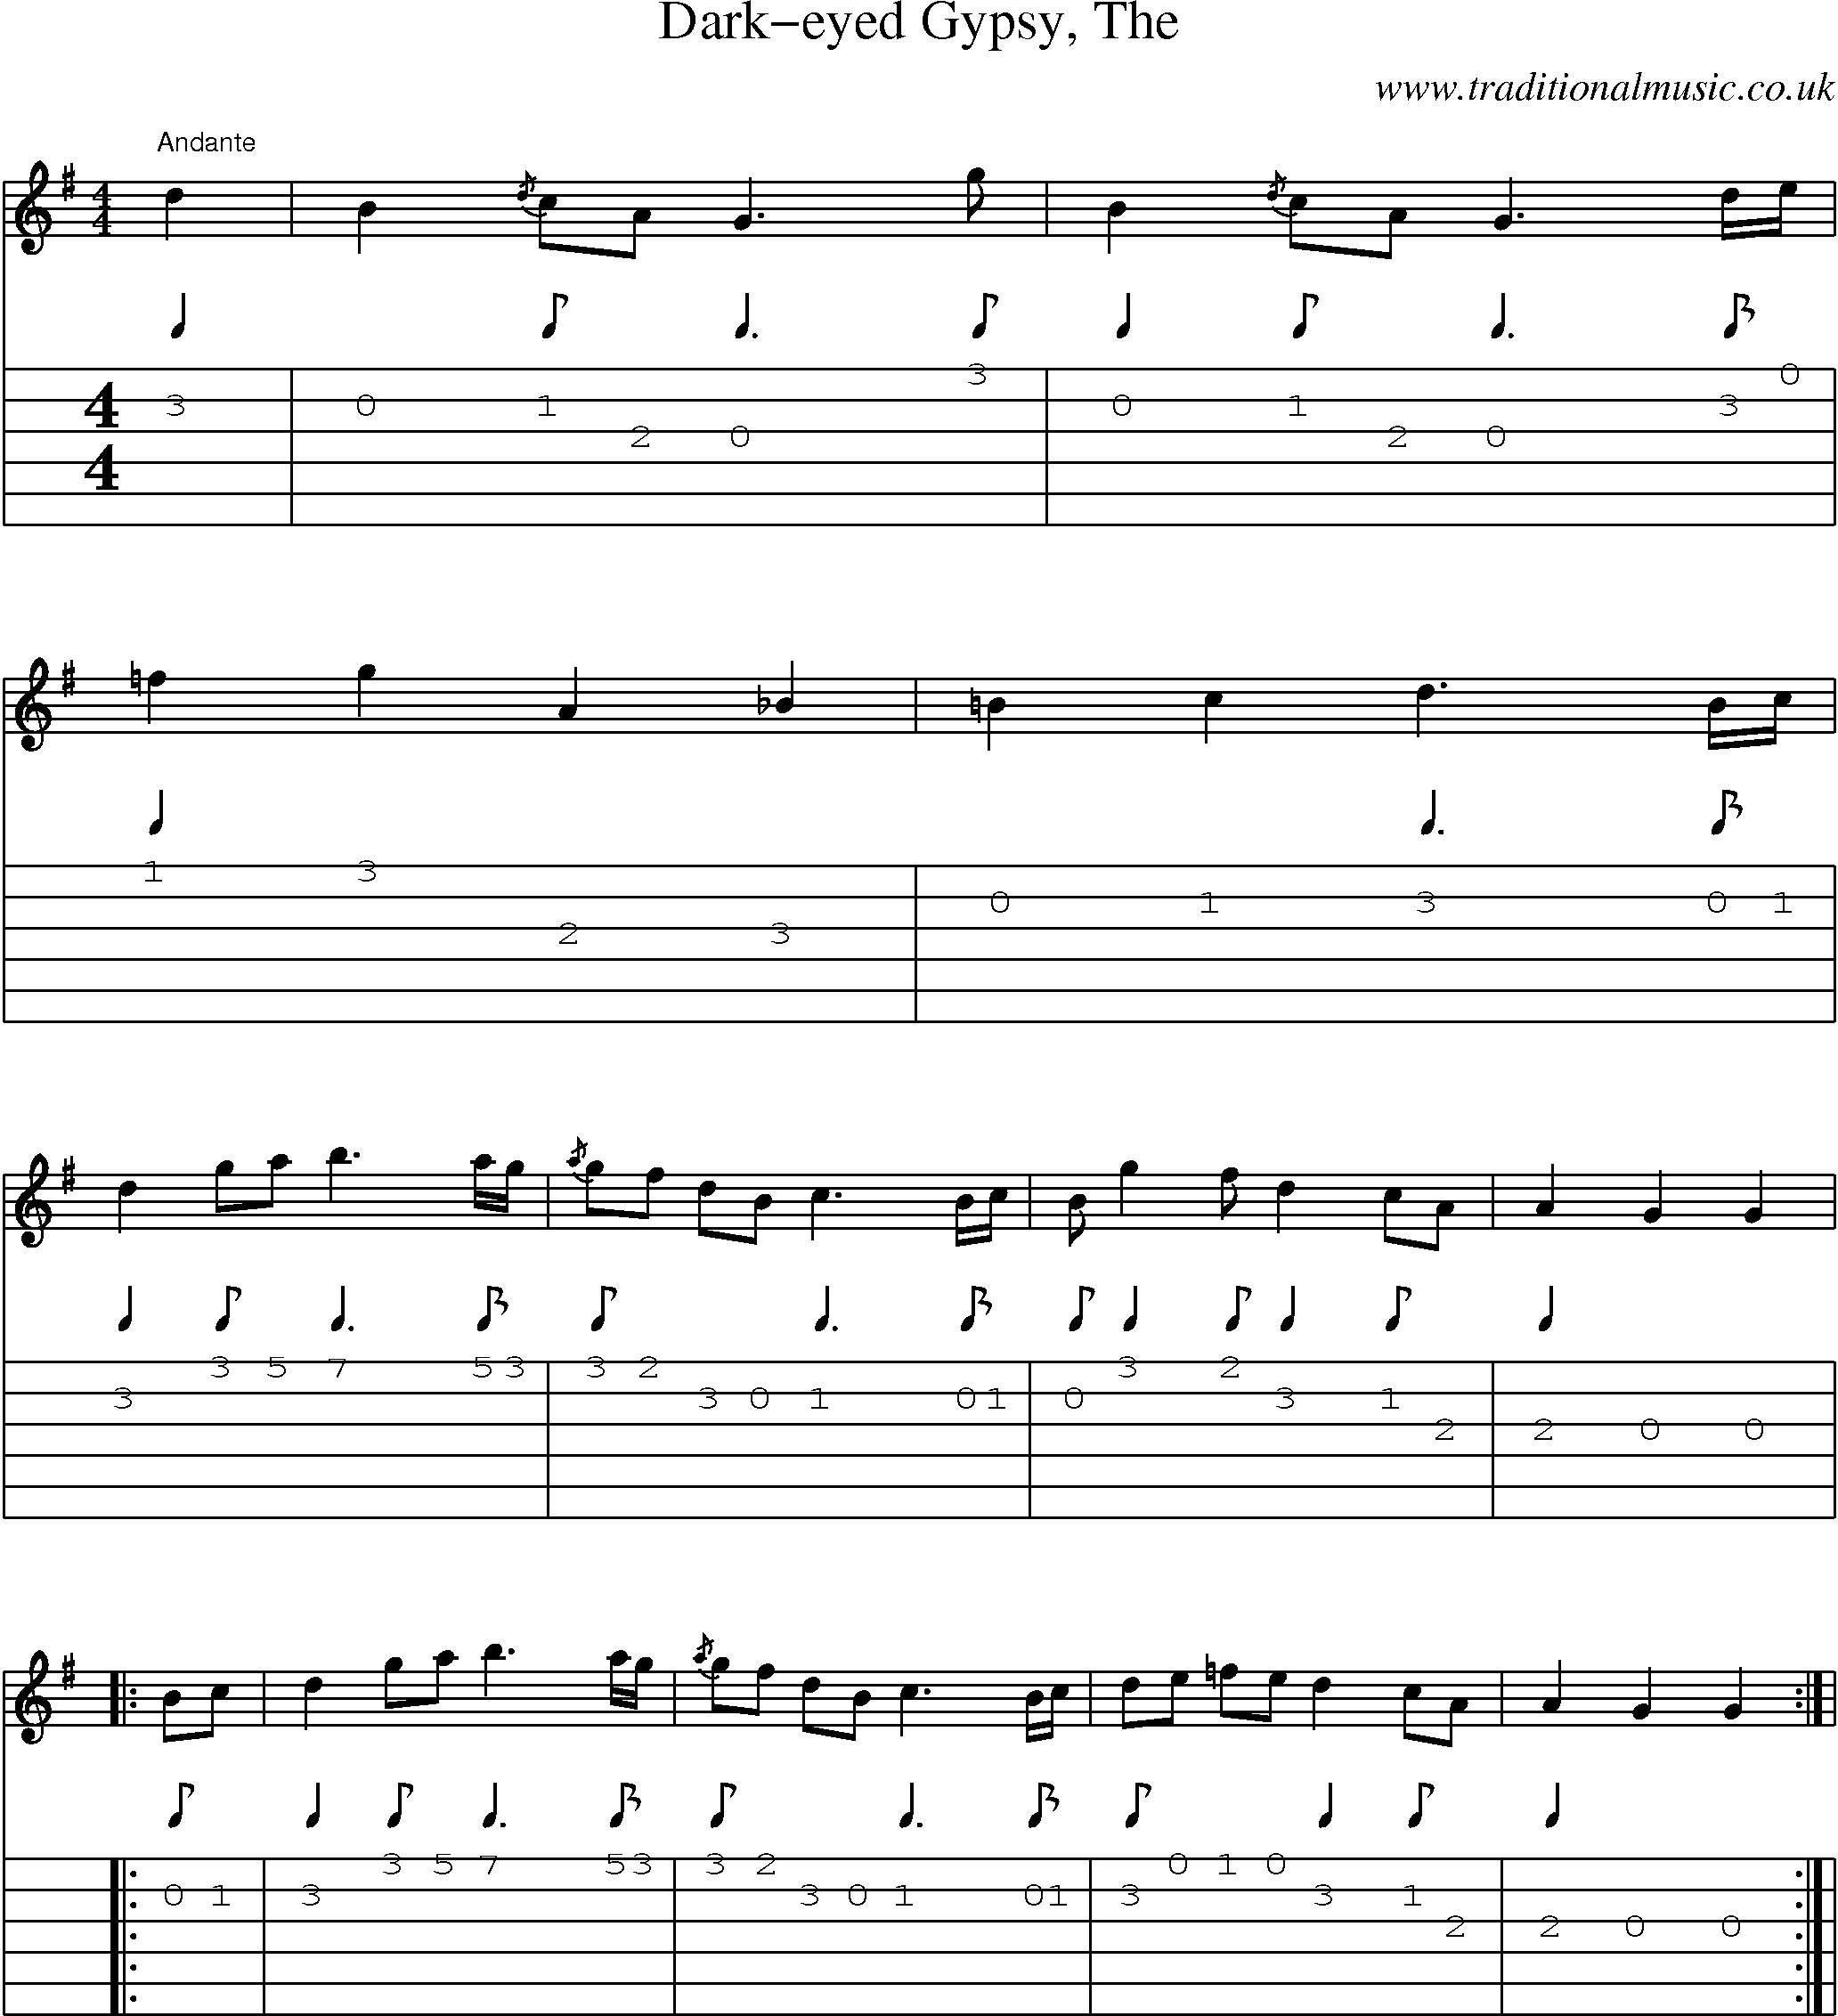 Music Score and Guitar Tabs for Darkeyed Gypsy